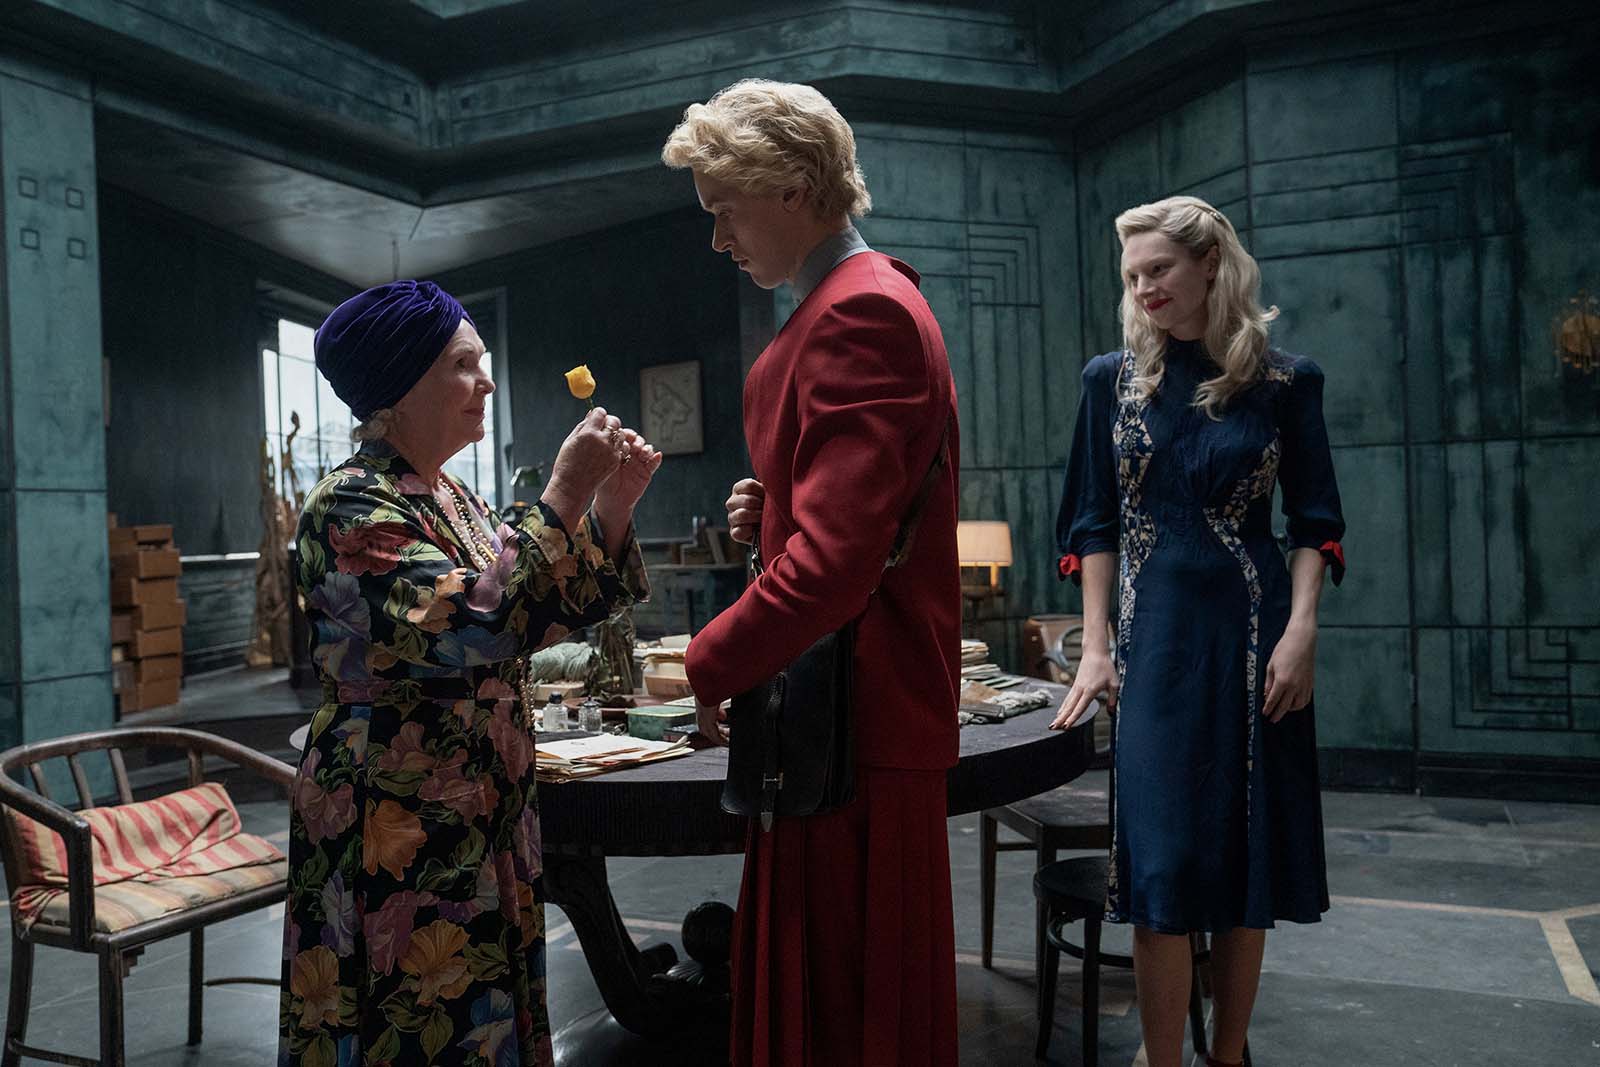 Snow must work for The Hunger Games to support his once-wealthy ‘Granma’am’ and pay for his education. Image © Lionsgate